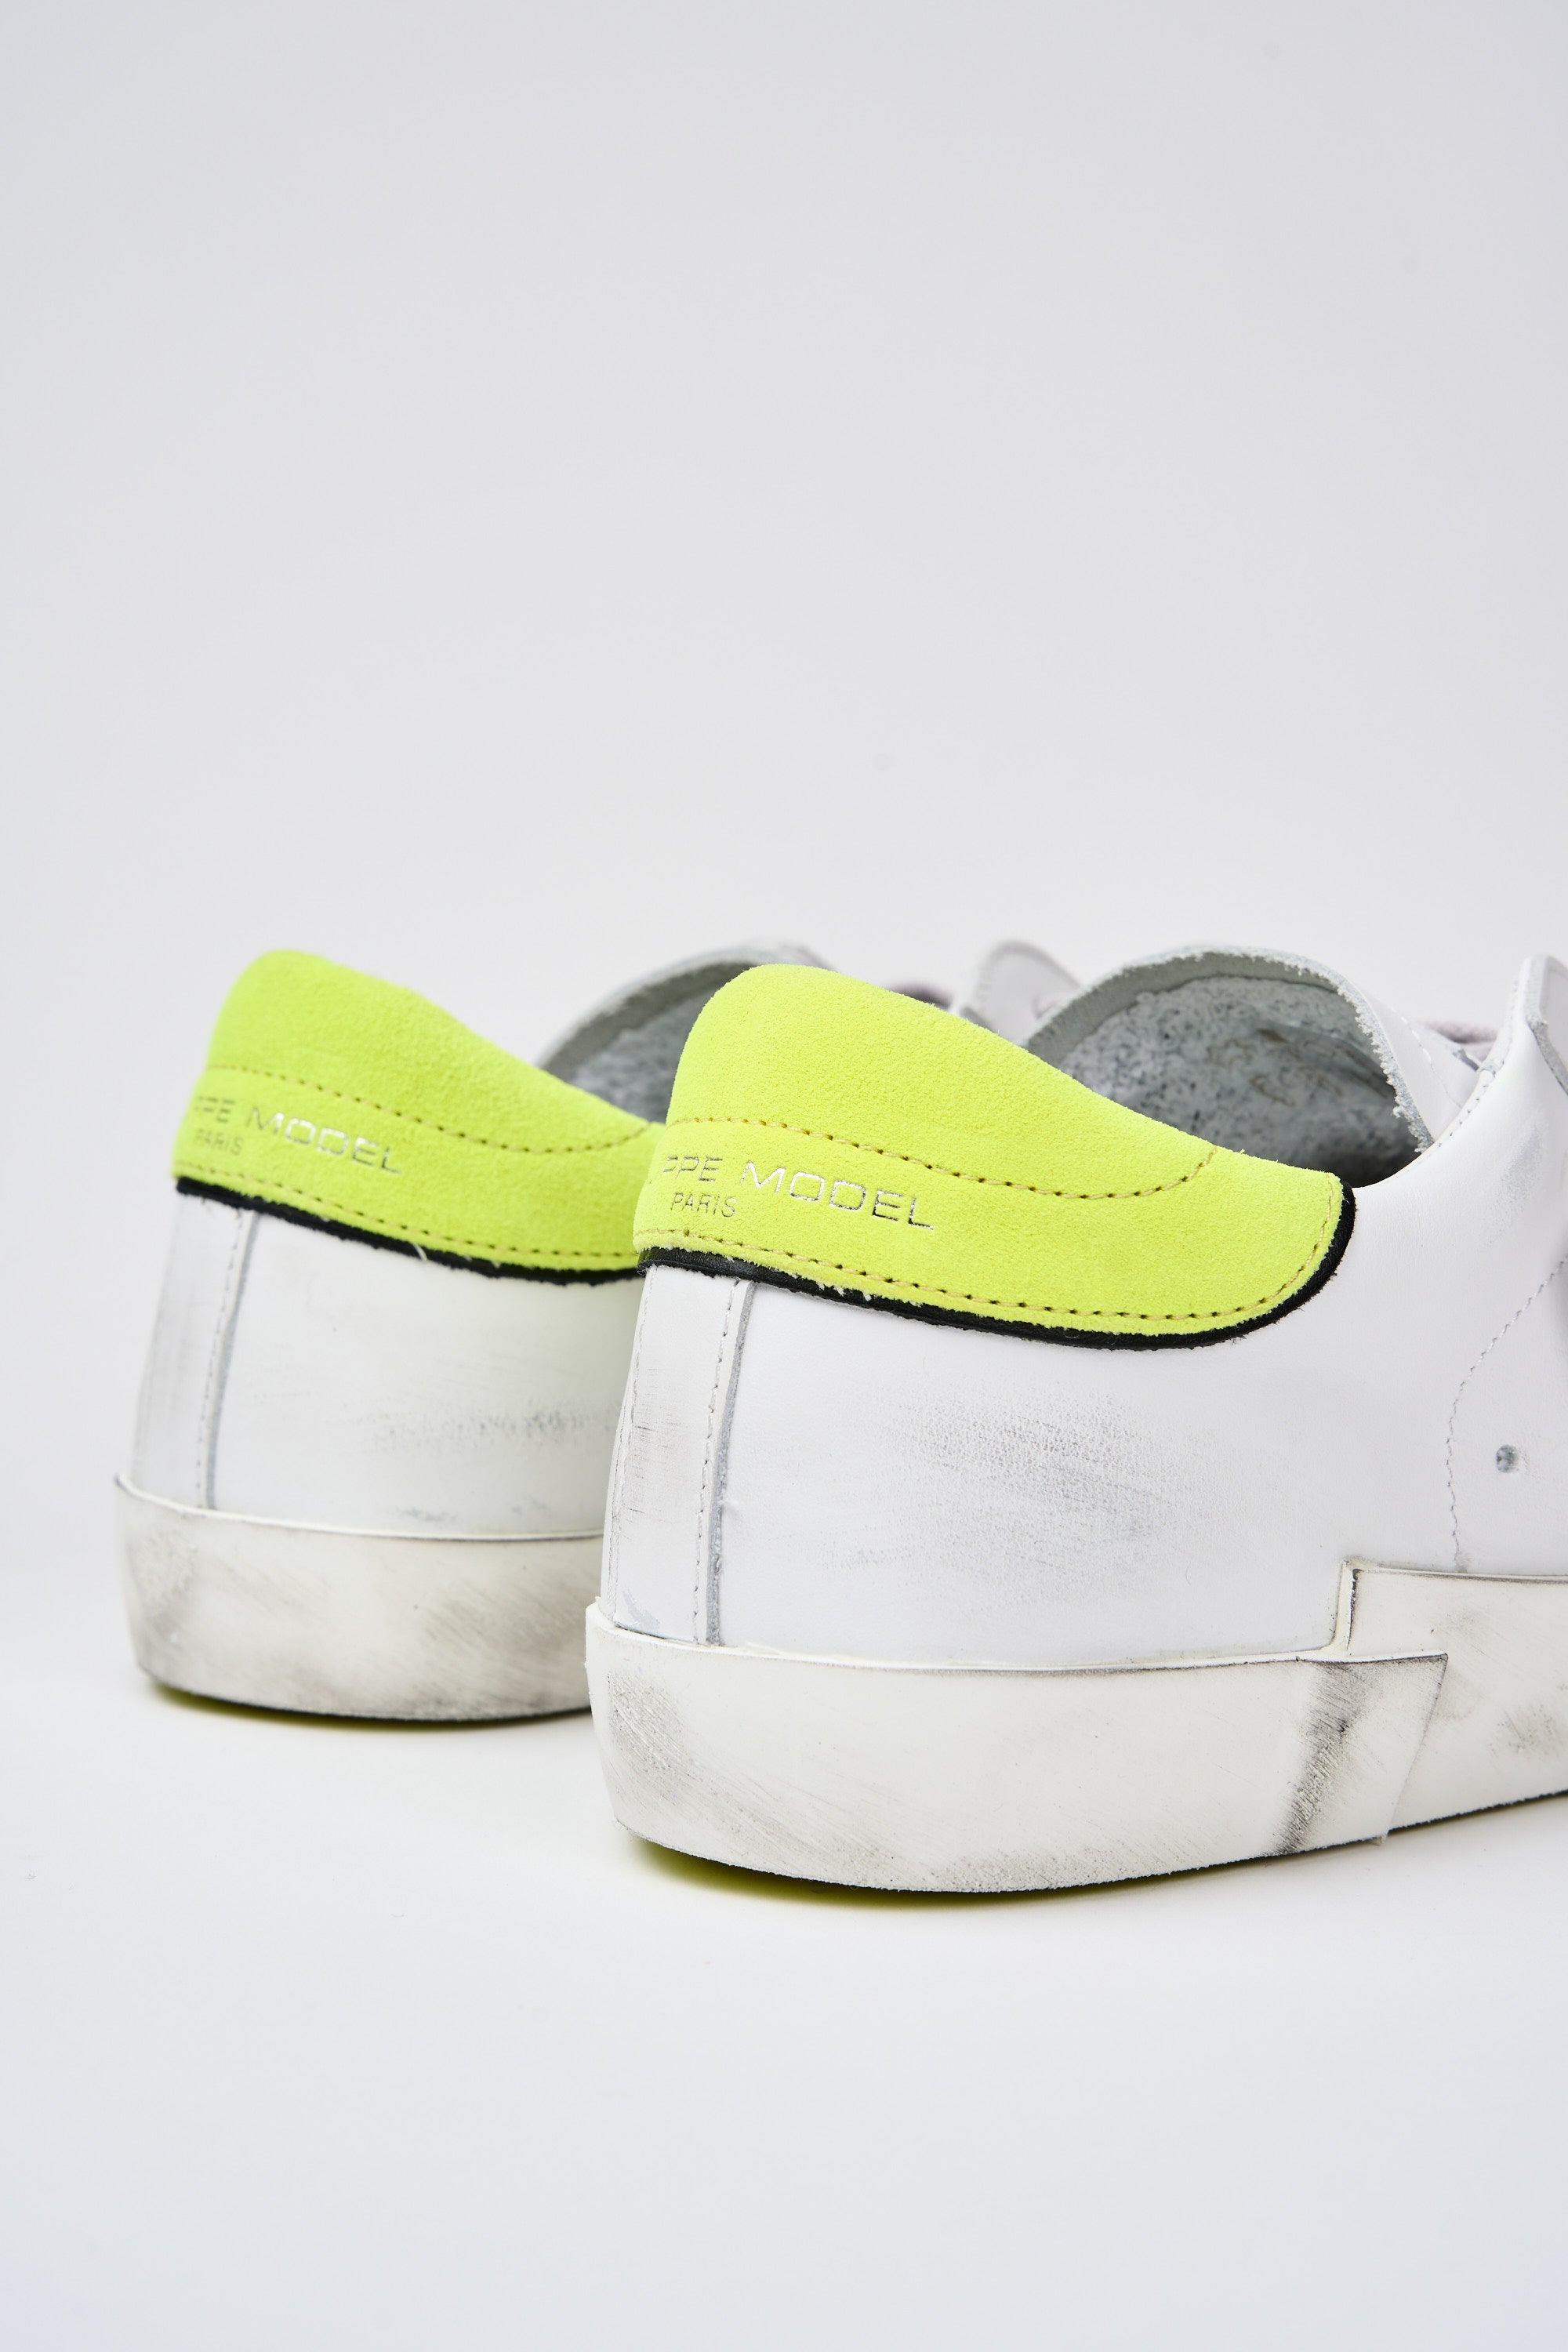 Philippe Model Sneaker Prsx Leather White/Yellow fluo-4